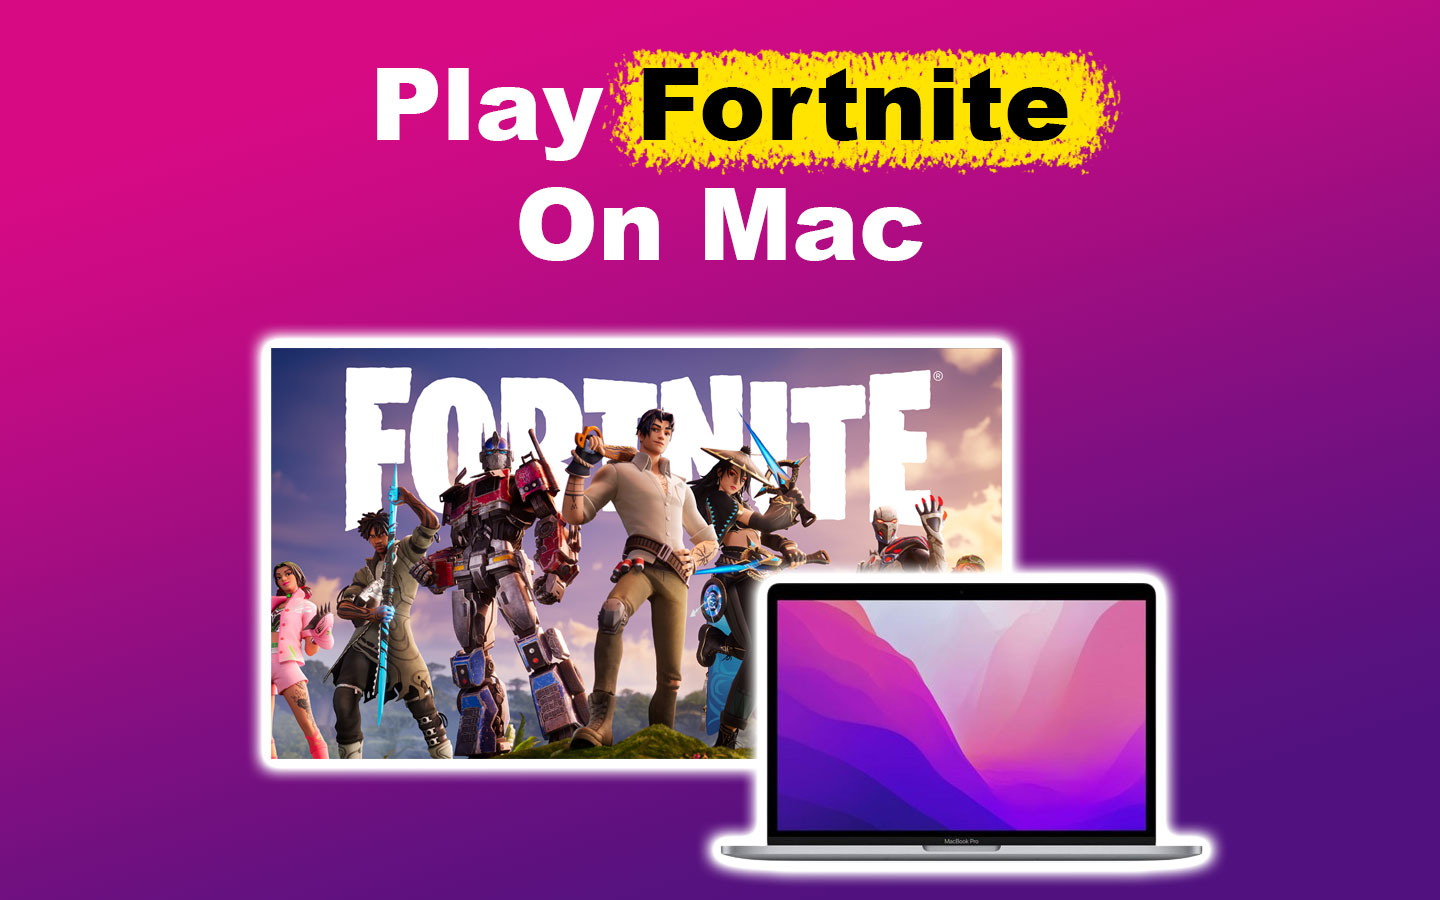 2 Easy Ways to Play Fortnite on Mac